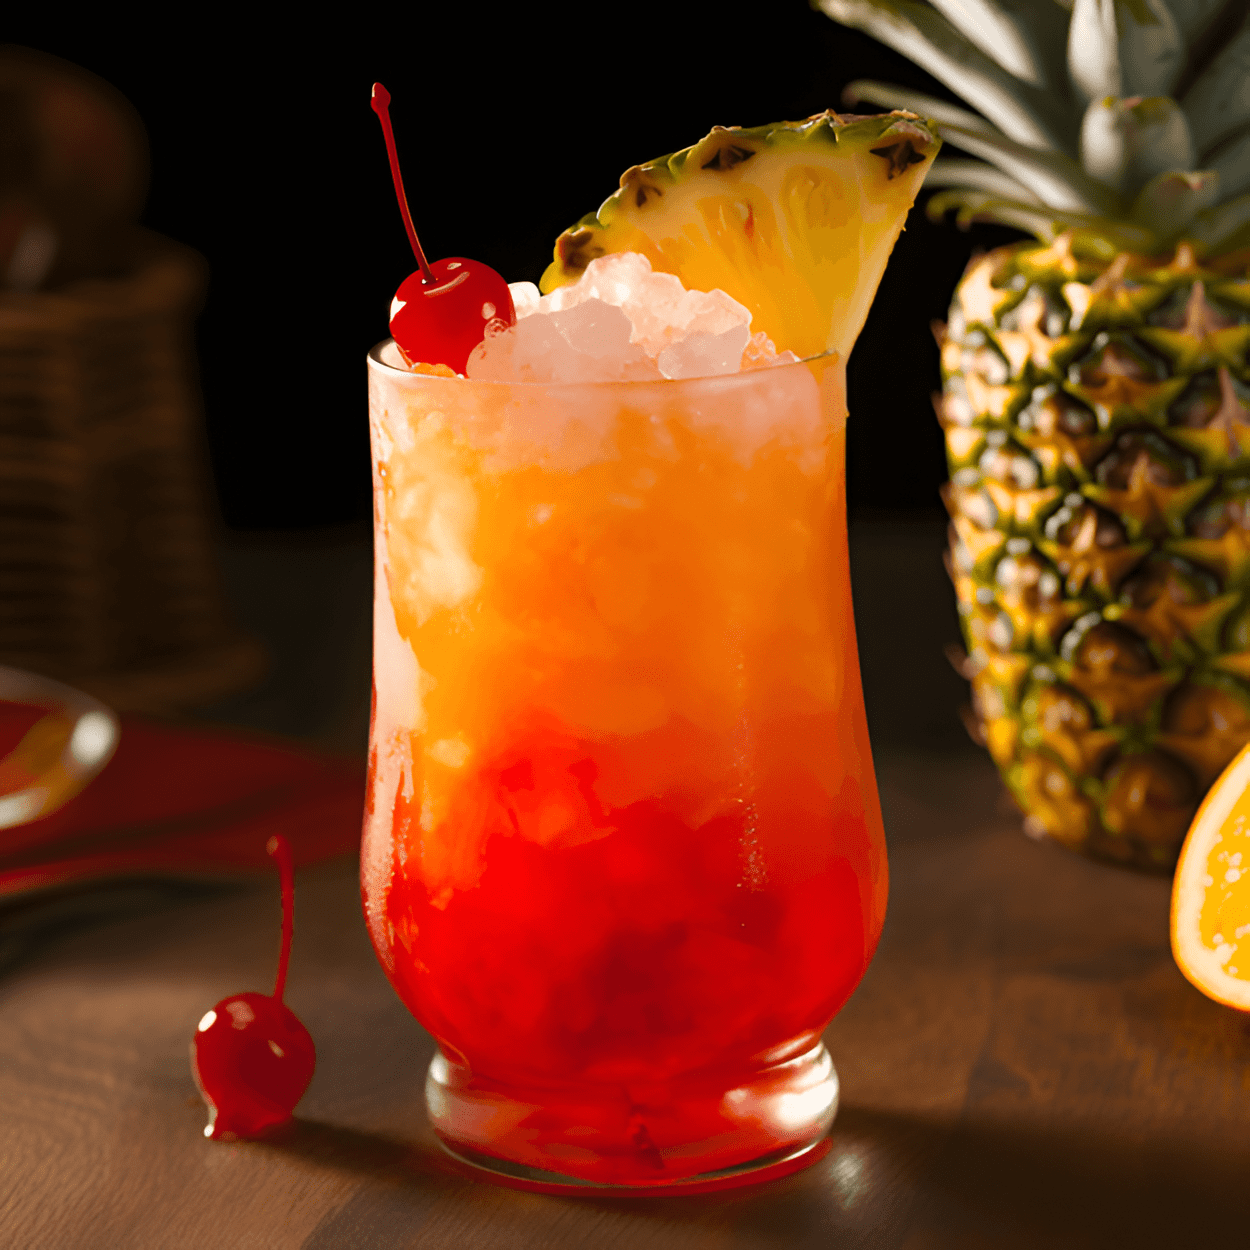 Mai Tai Mocktail Recipe - The Mai Tai Mocktail is a sweet and tangy drink with a hint of sourness from the lime juice. It has a fruity and tropical taste, with a refreshing and light finish.